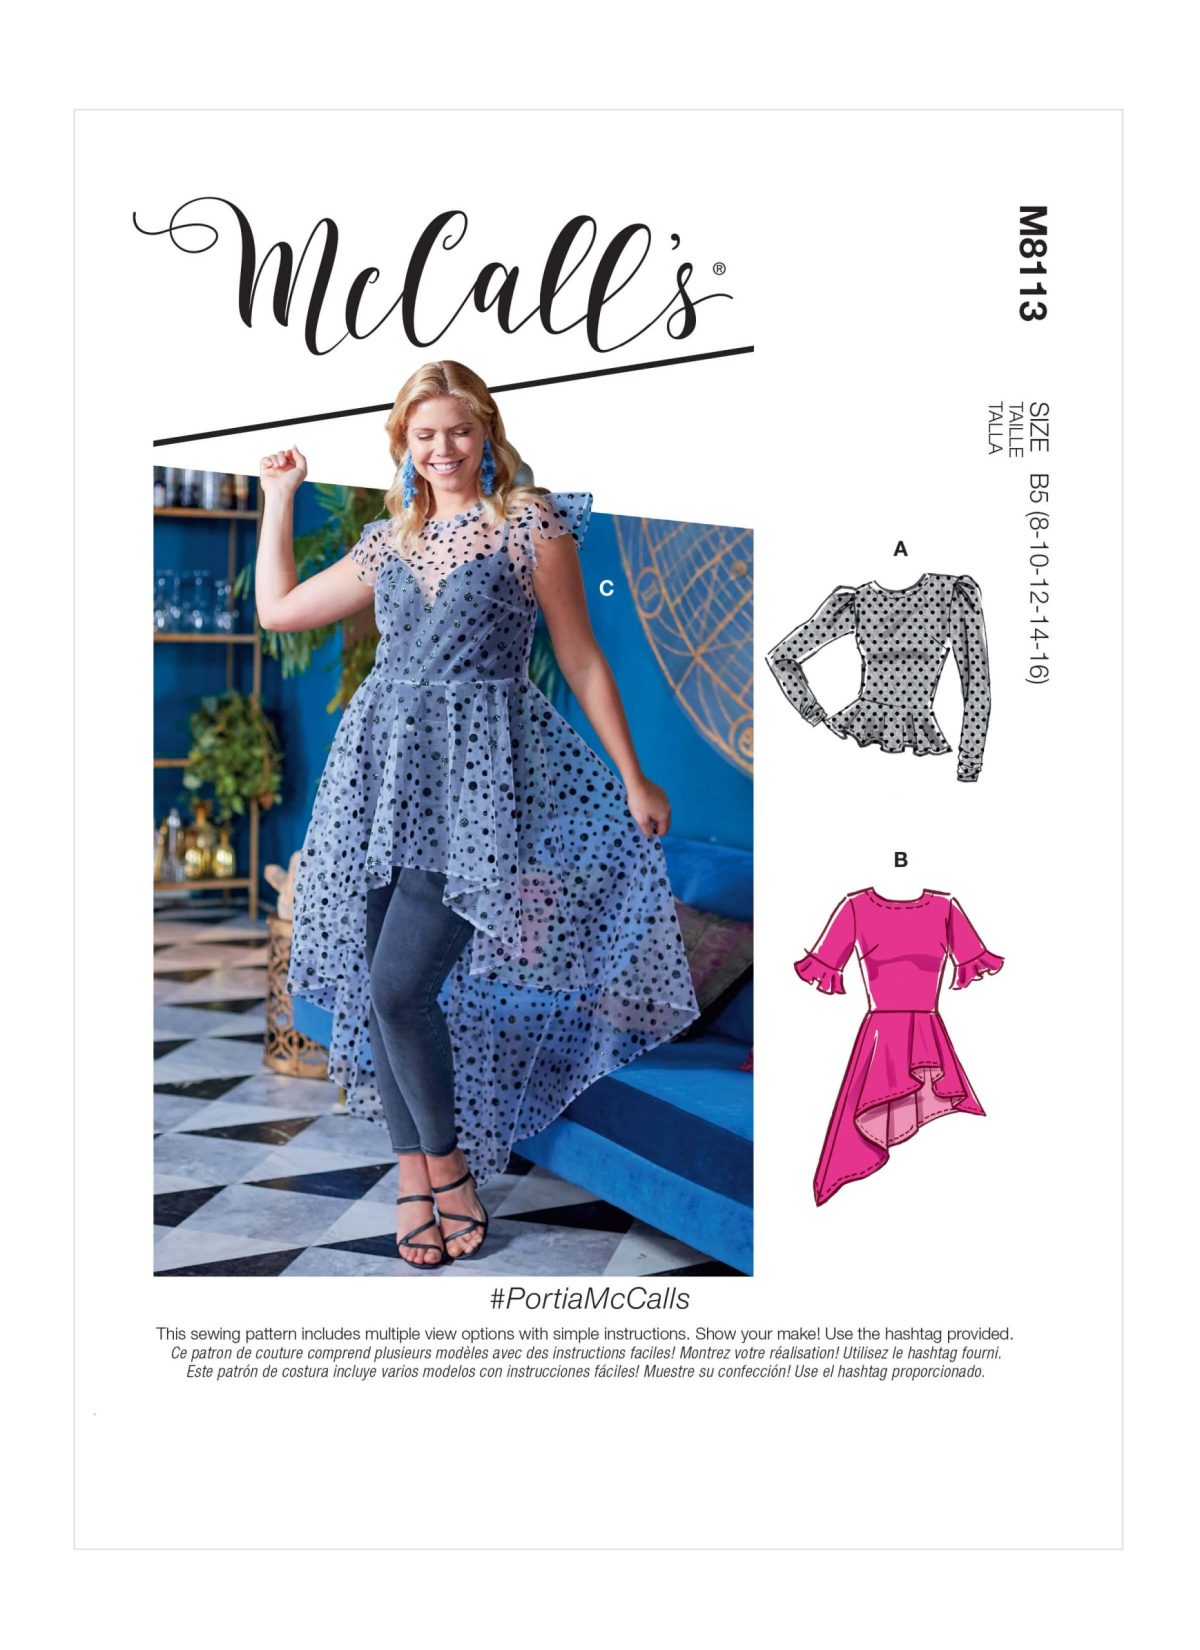 McCalls Sewing Pattern M8113 Misses' & Women's Tops With Cup Sizes Pattern Pieces. #PortiaMcCalls